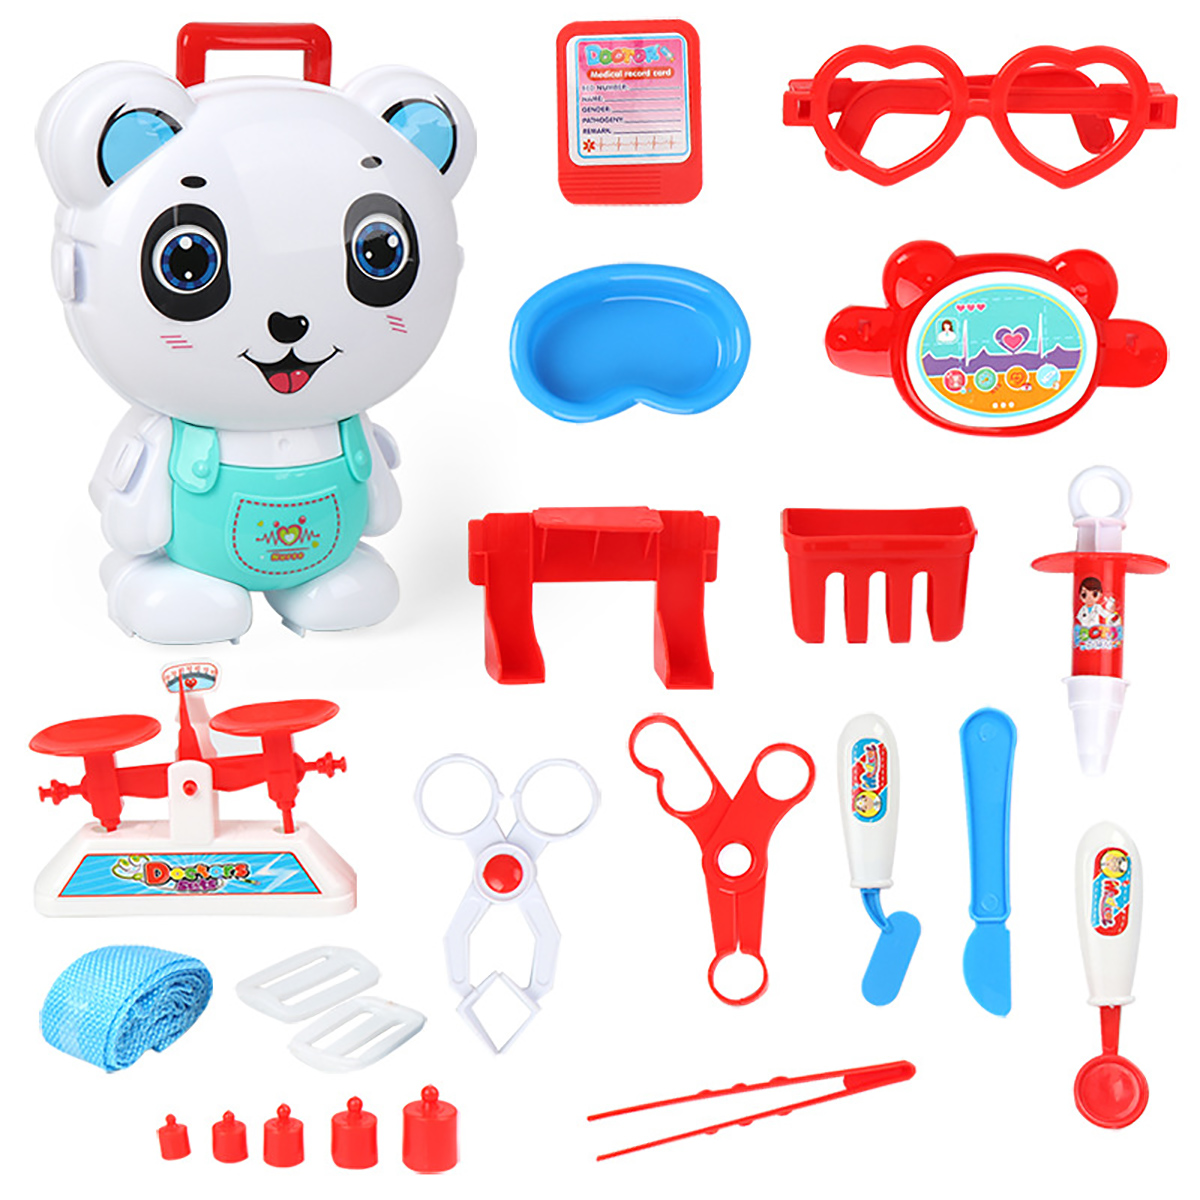 Simulation-Kids-Kitchen-Cooking-Tools-Doctors-Makeup-Playing-Education-Pretend-Toy-Set-with-Carrying-1725293-8